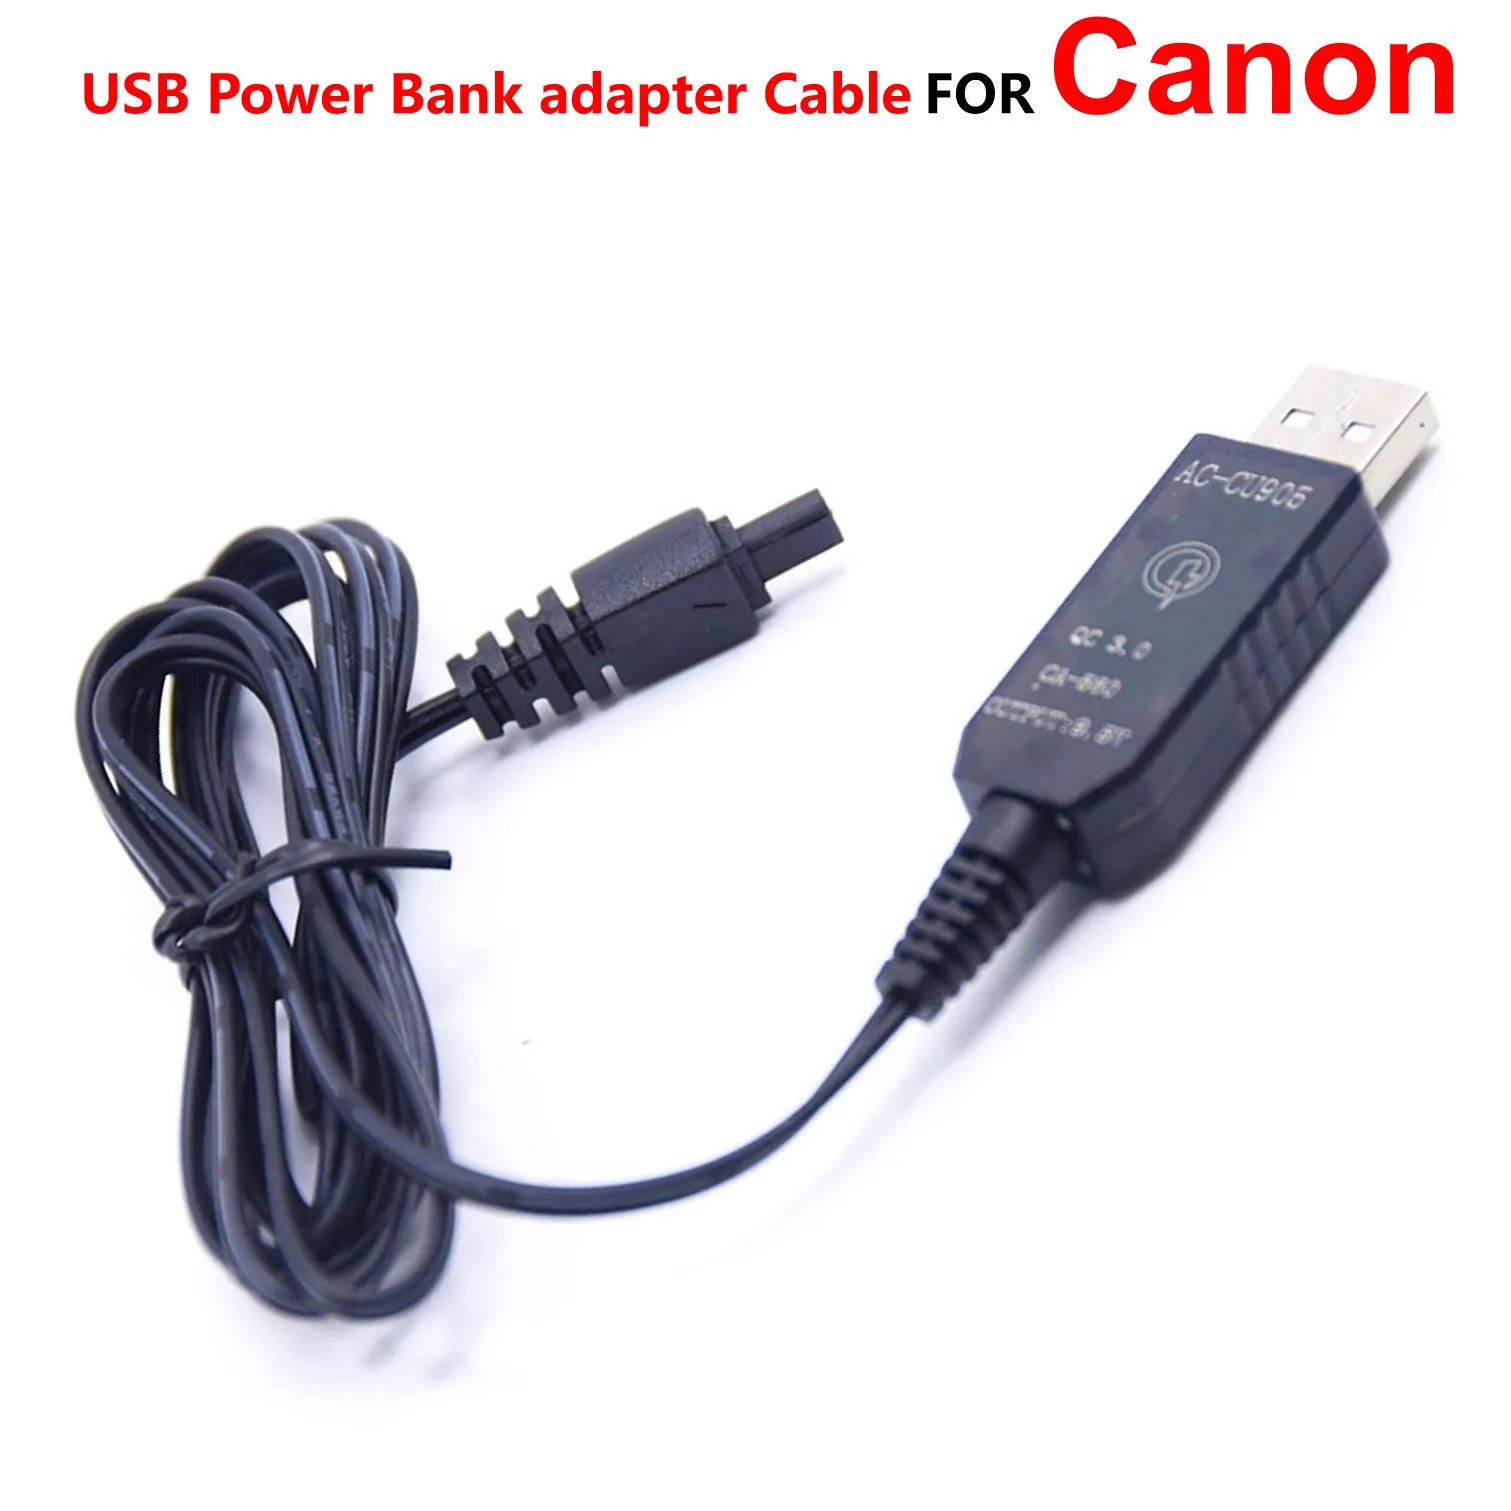 

USB Cable CA-560 CA560 QC3.0 QC4.0 Charger Power Bank For Canon Cameras ZR25MC ZR30MC ZR40 ZR40MC ZR45MC ZR50MC Pi MV30 MV30i